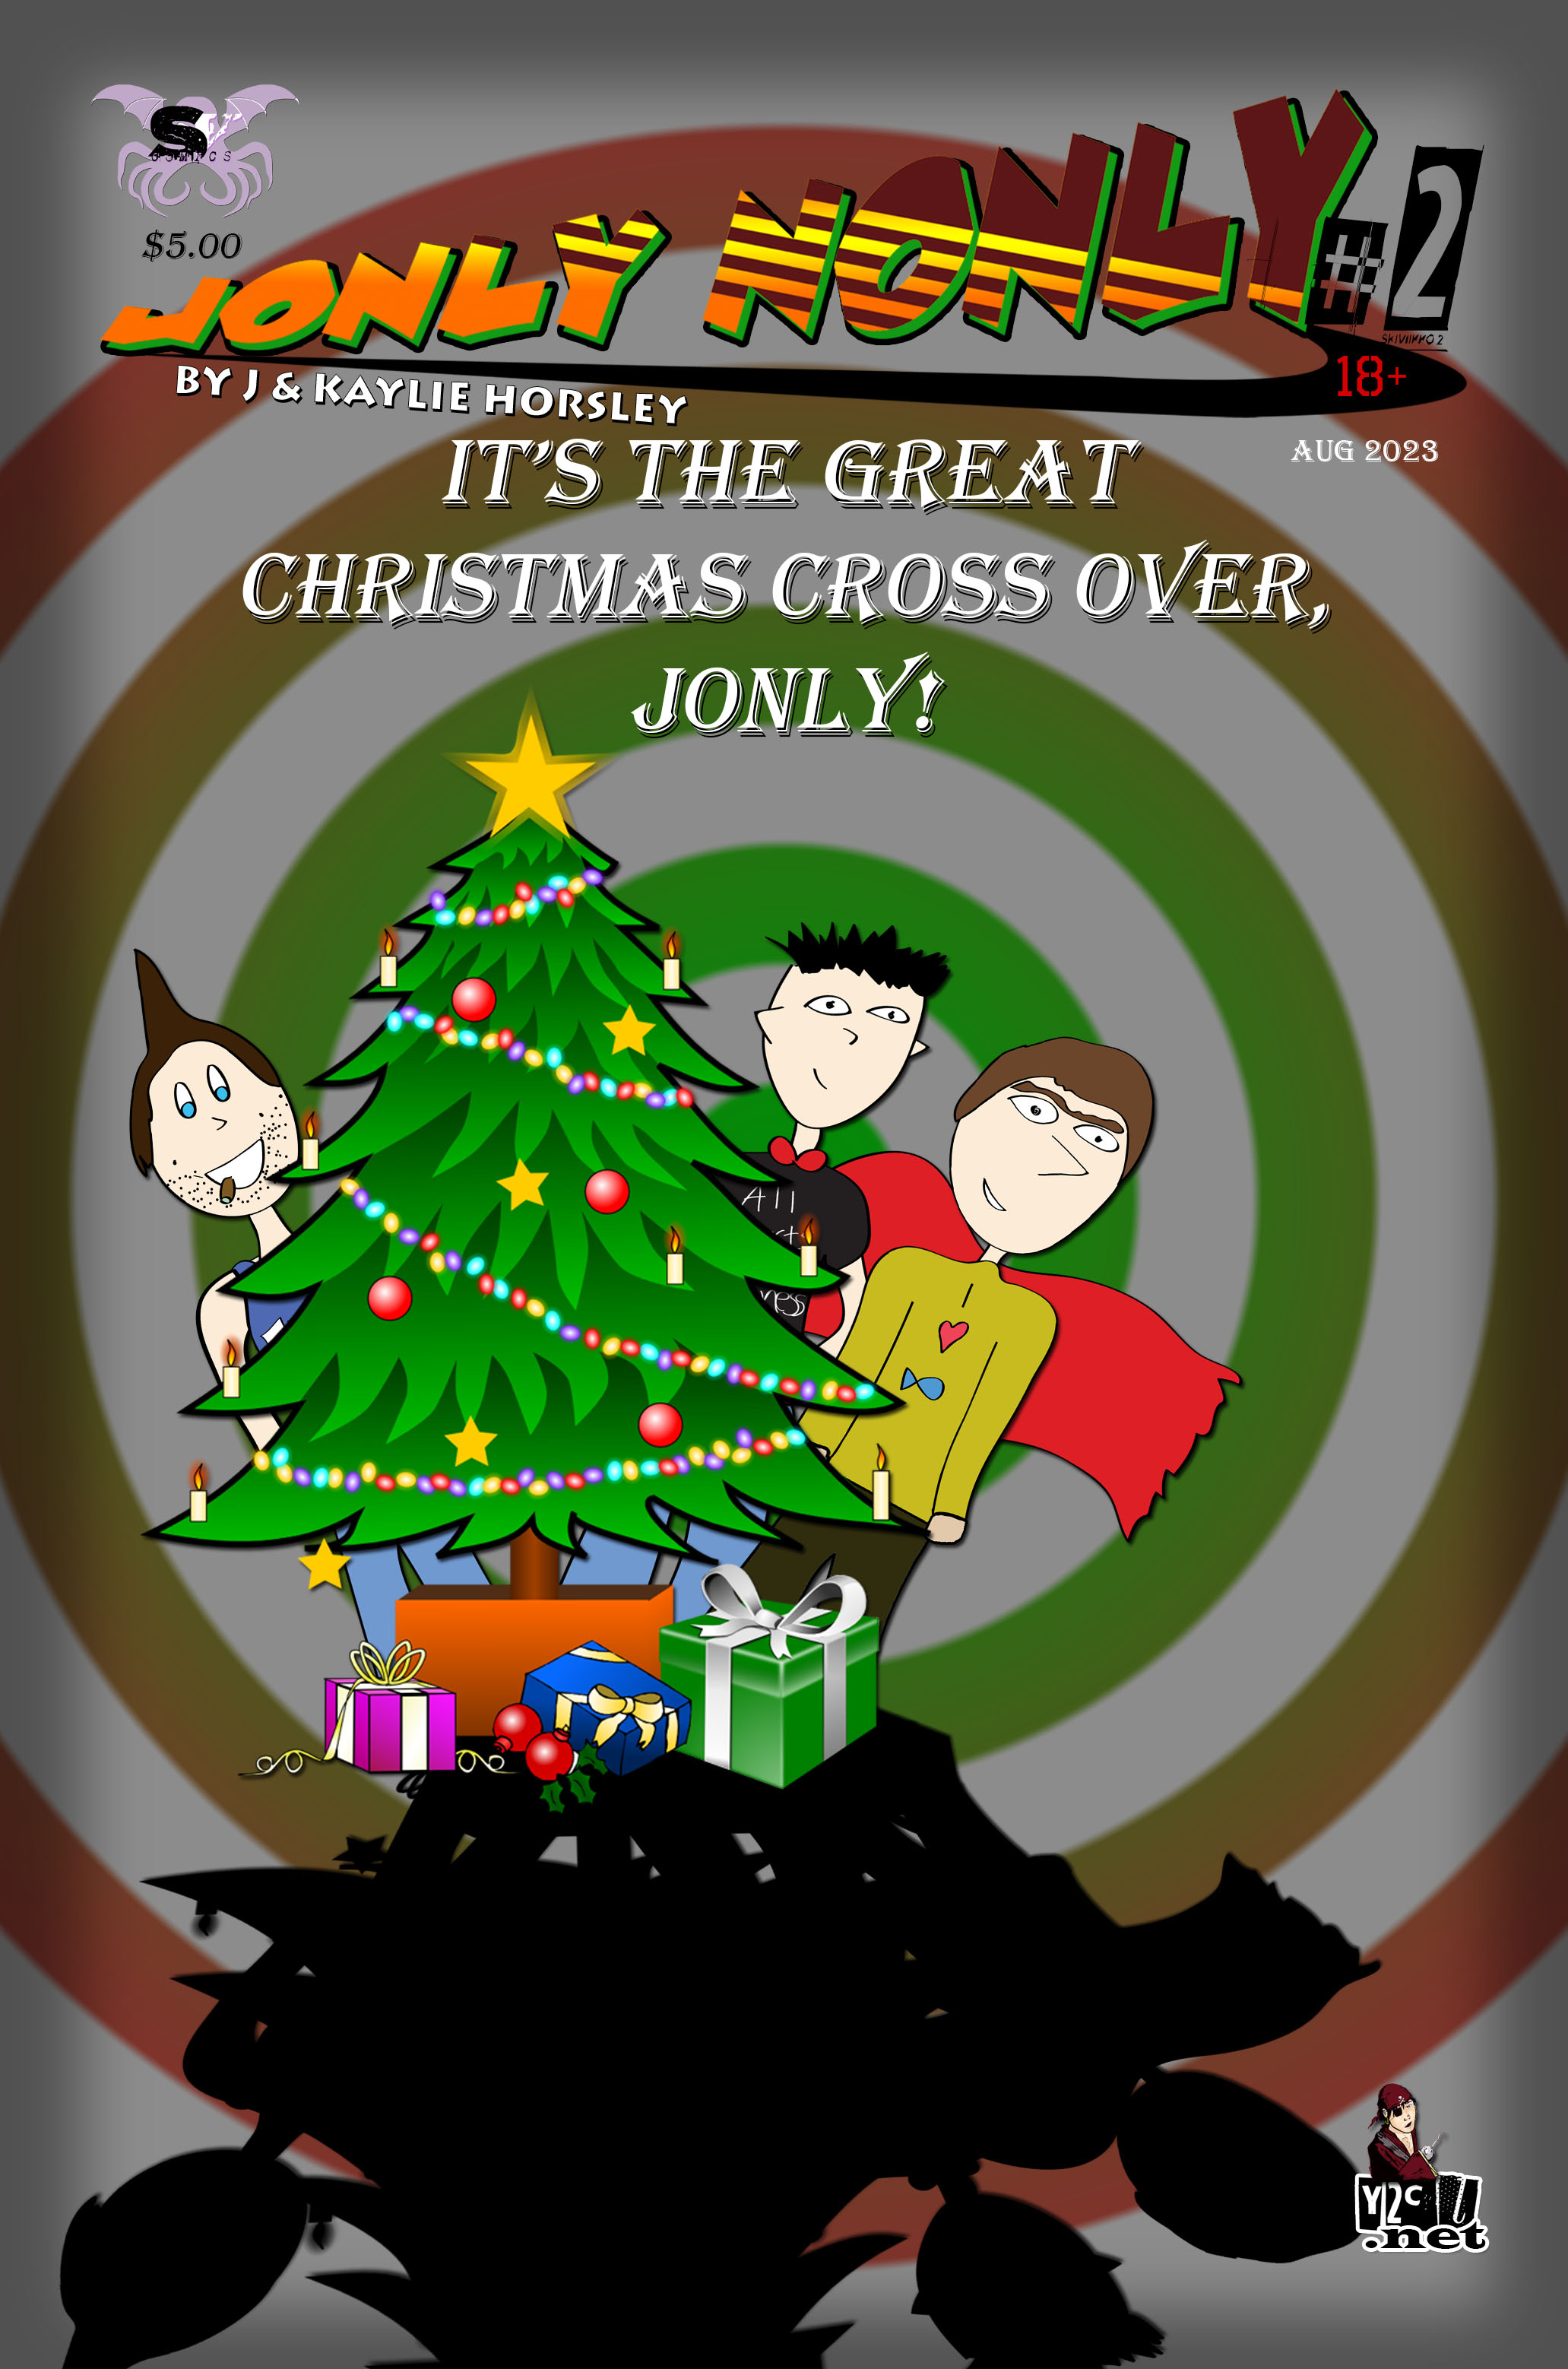 Jonly Nonly #2 - It's the Great Christmas Crossover, Jonly!